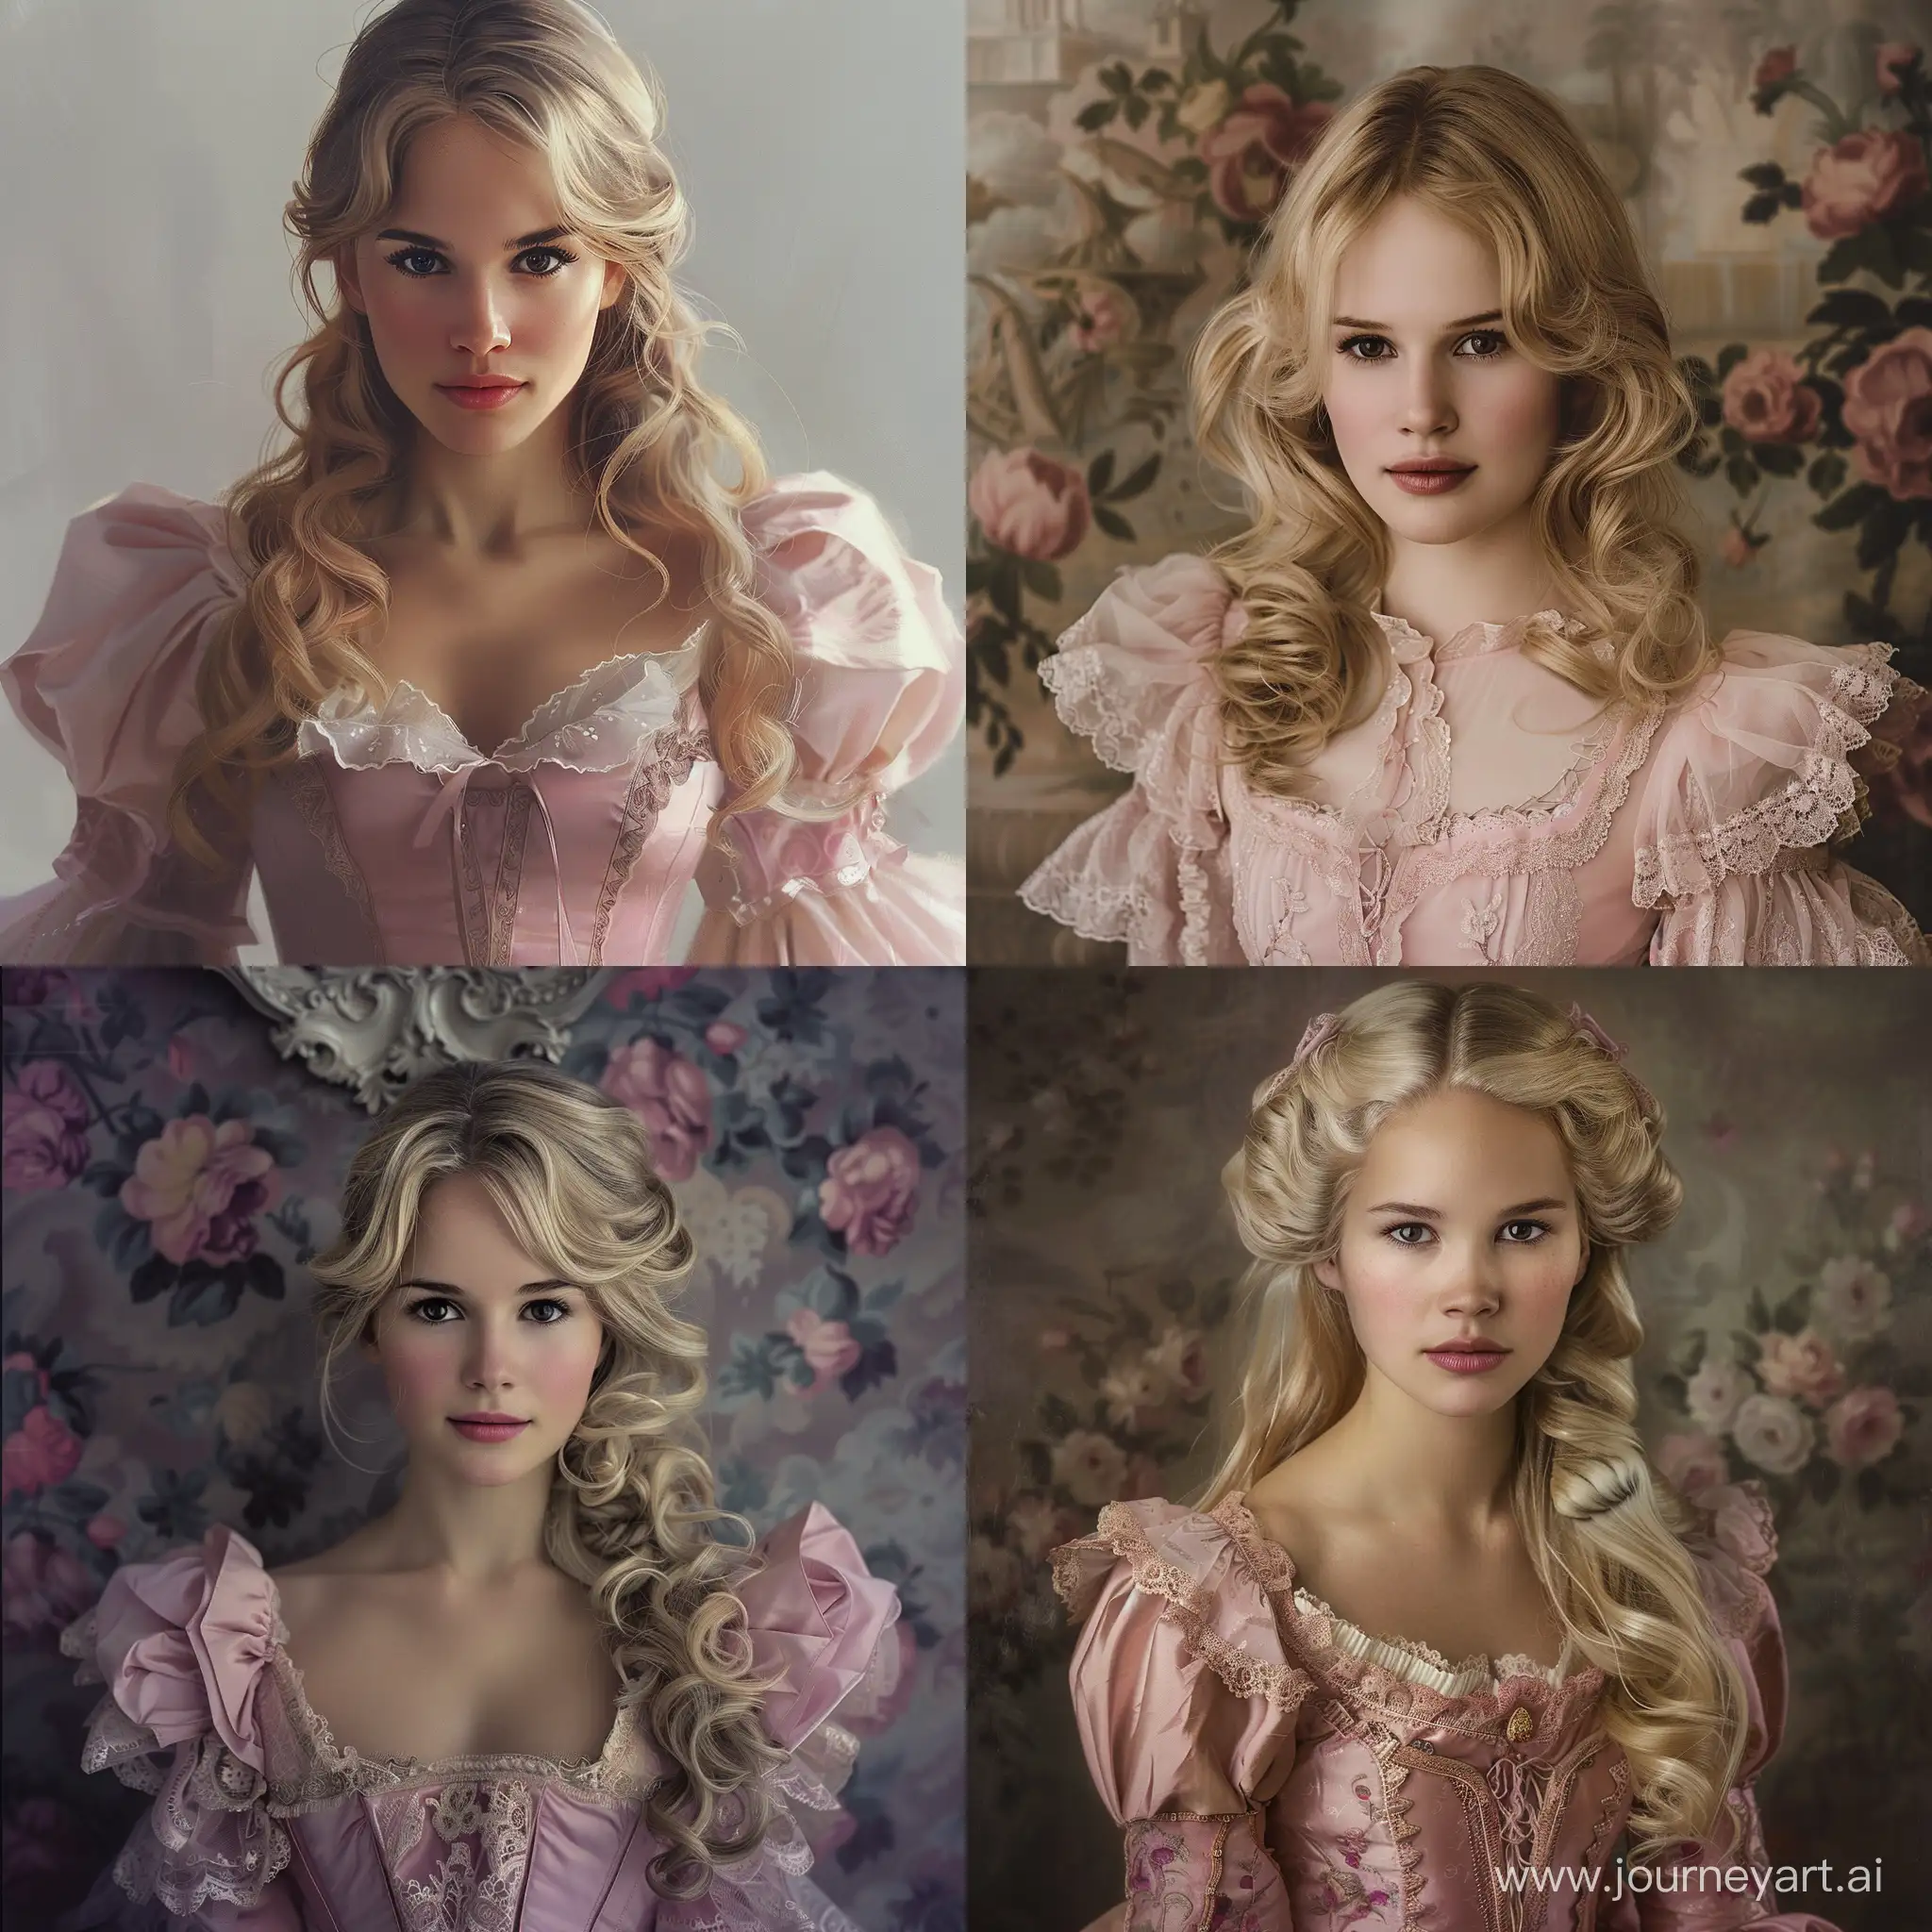 Blonde-Girl-in-19th-Century-Pink-Ball-Gown-Alicia-Vikander-Lookalike